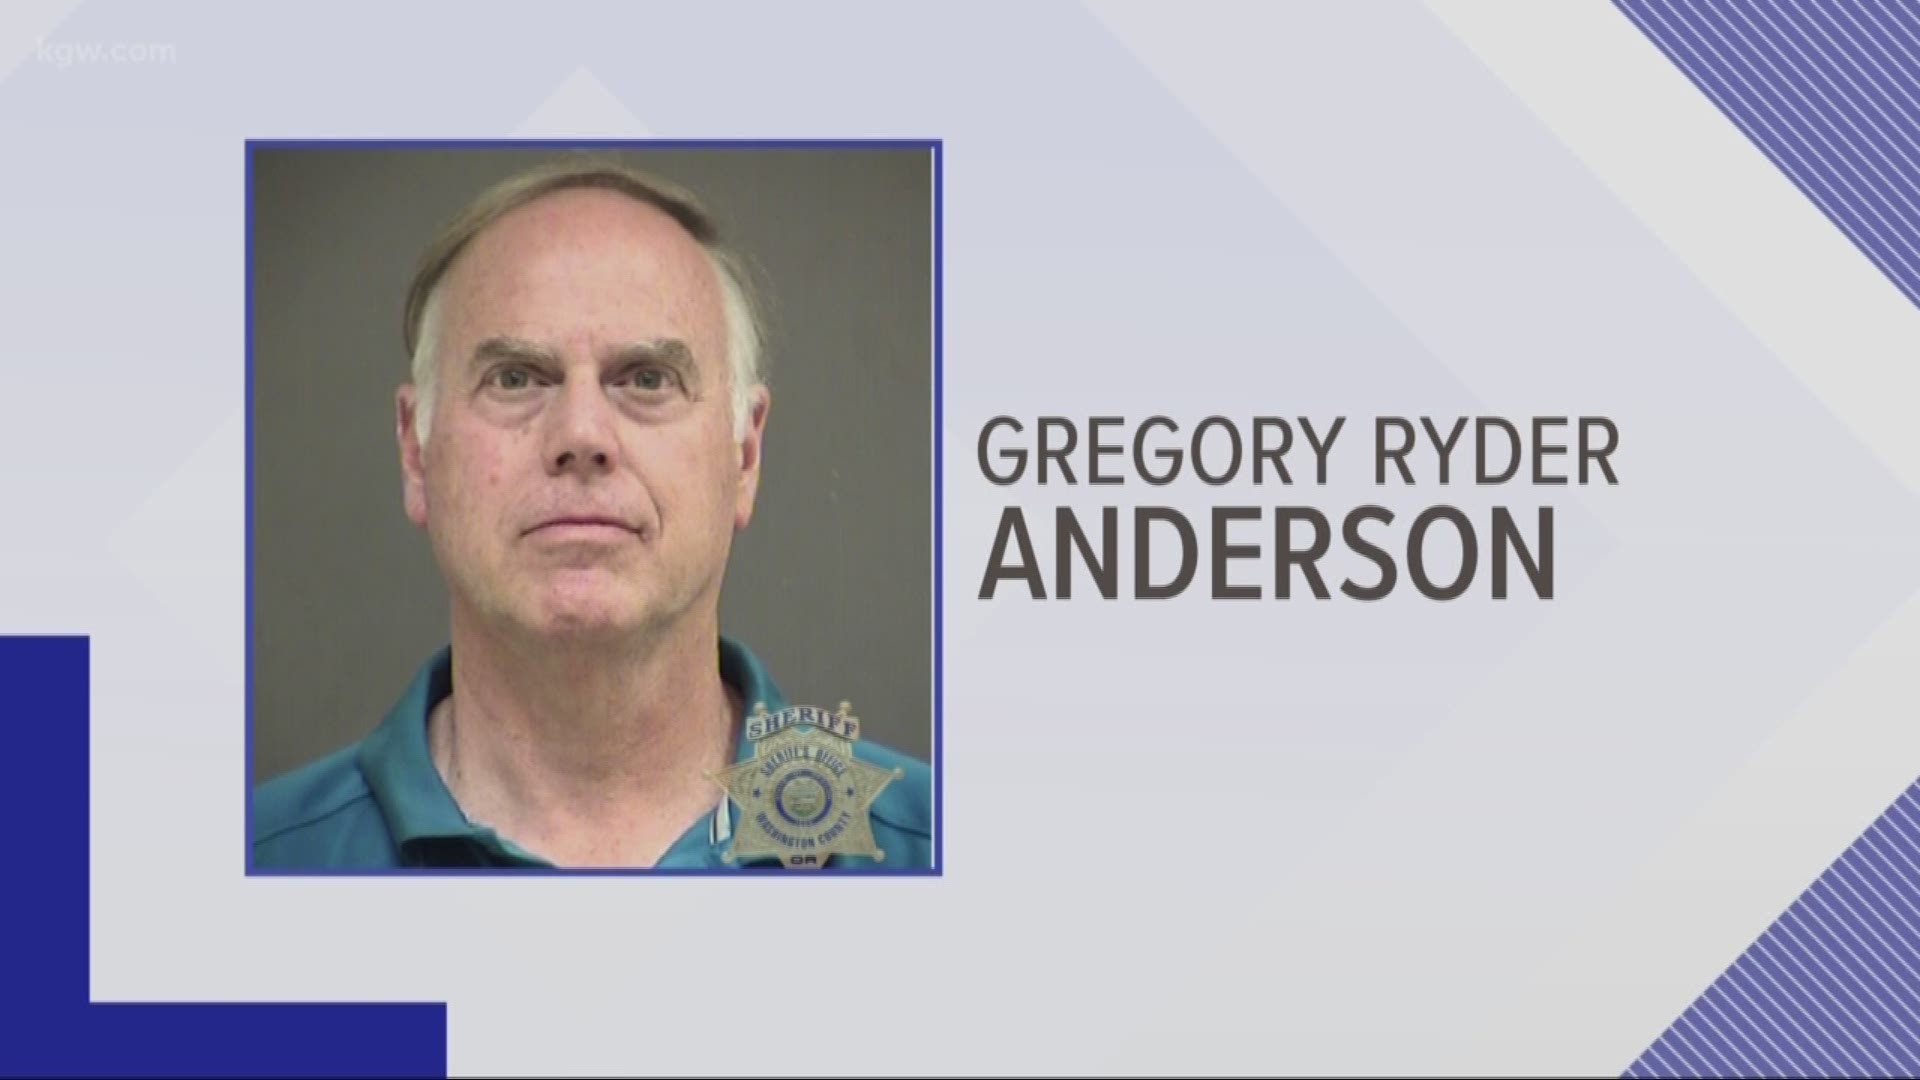 Greg Anderson served as an adviser to several youth organizations and police fear there may be more victims.